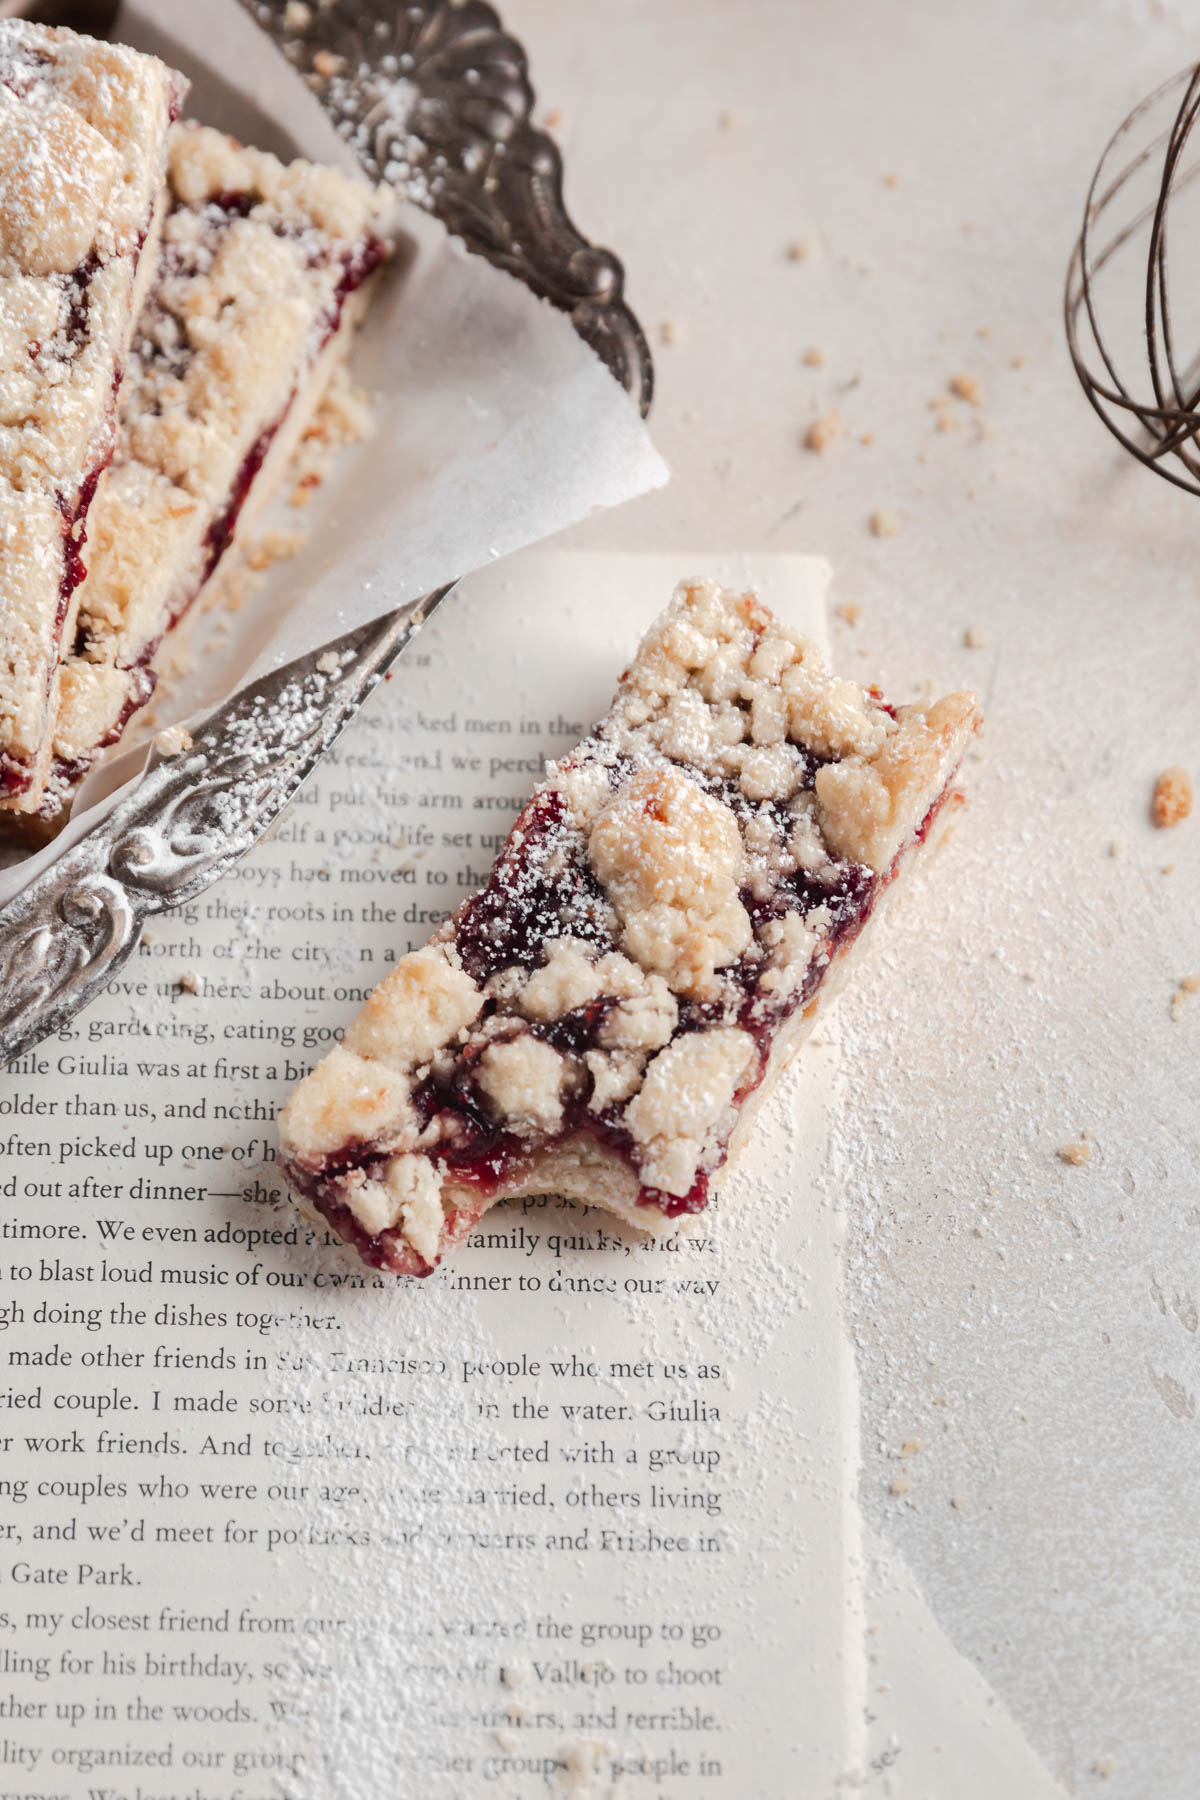 raspberry crumble bar dusted with powdered sugar